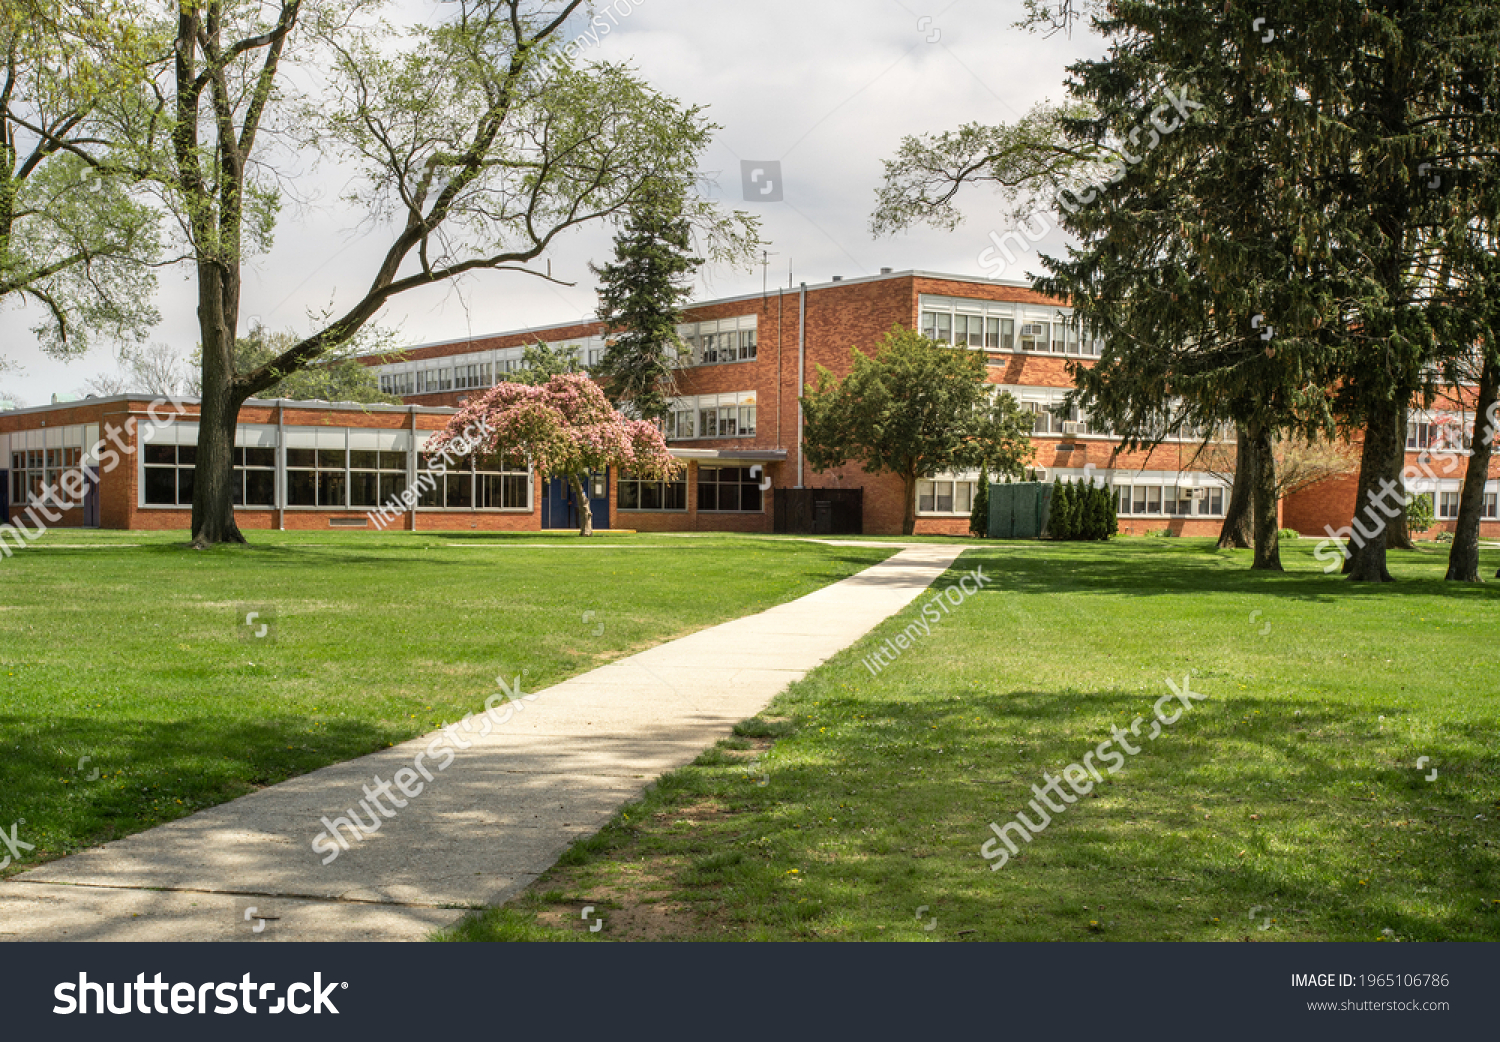 Exterior view of a typical American school #1965106786